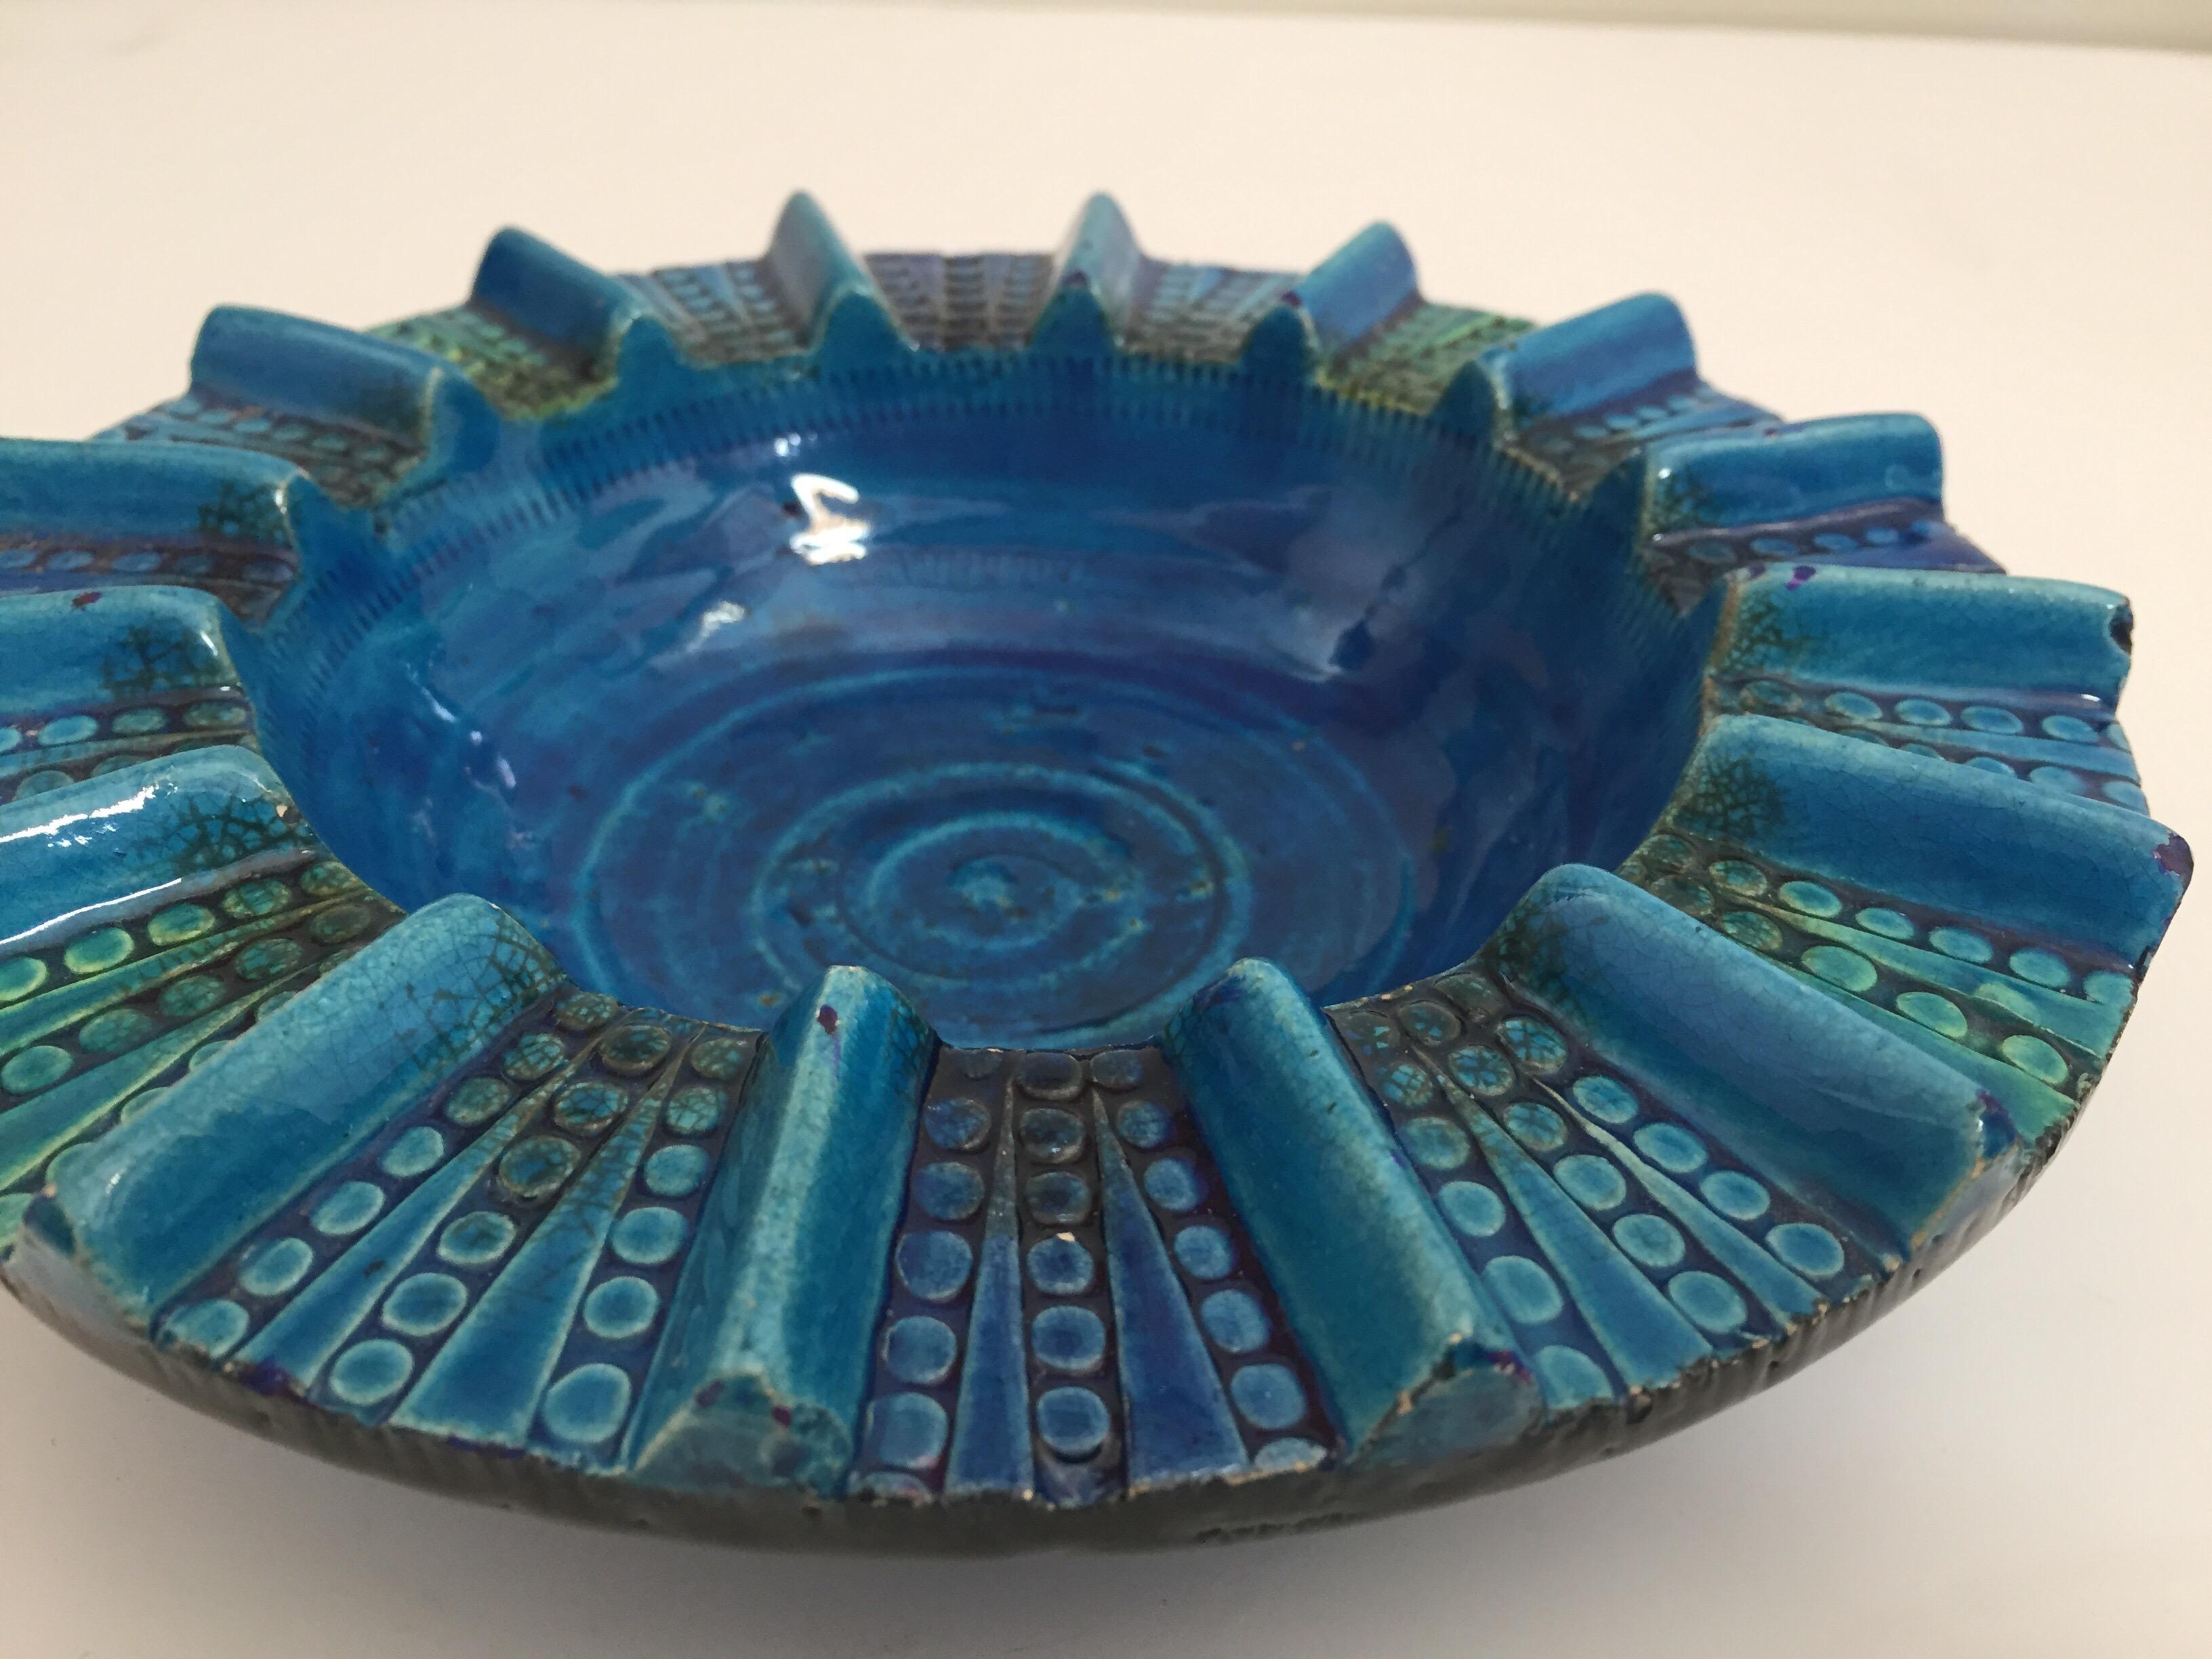 Vintage Blue Ceramic Ashtray Handcrafted in Italy by Aldo Londi 1950 For Sale 9